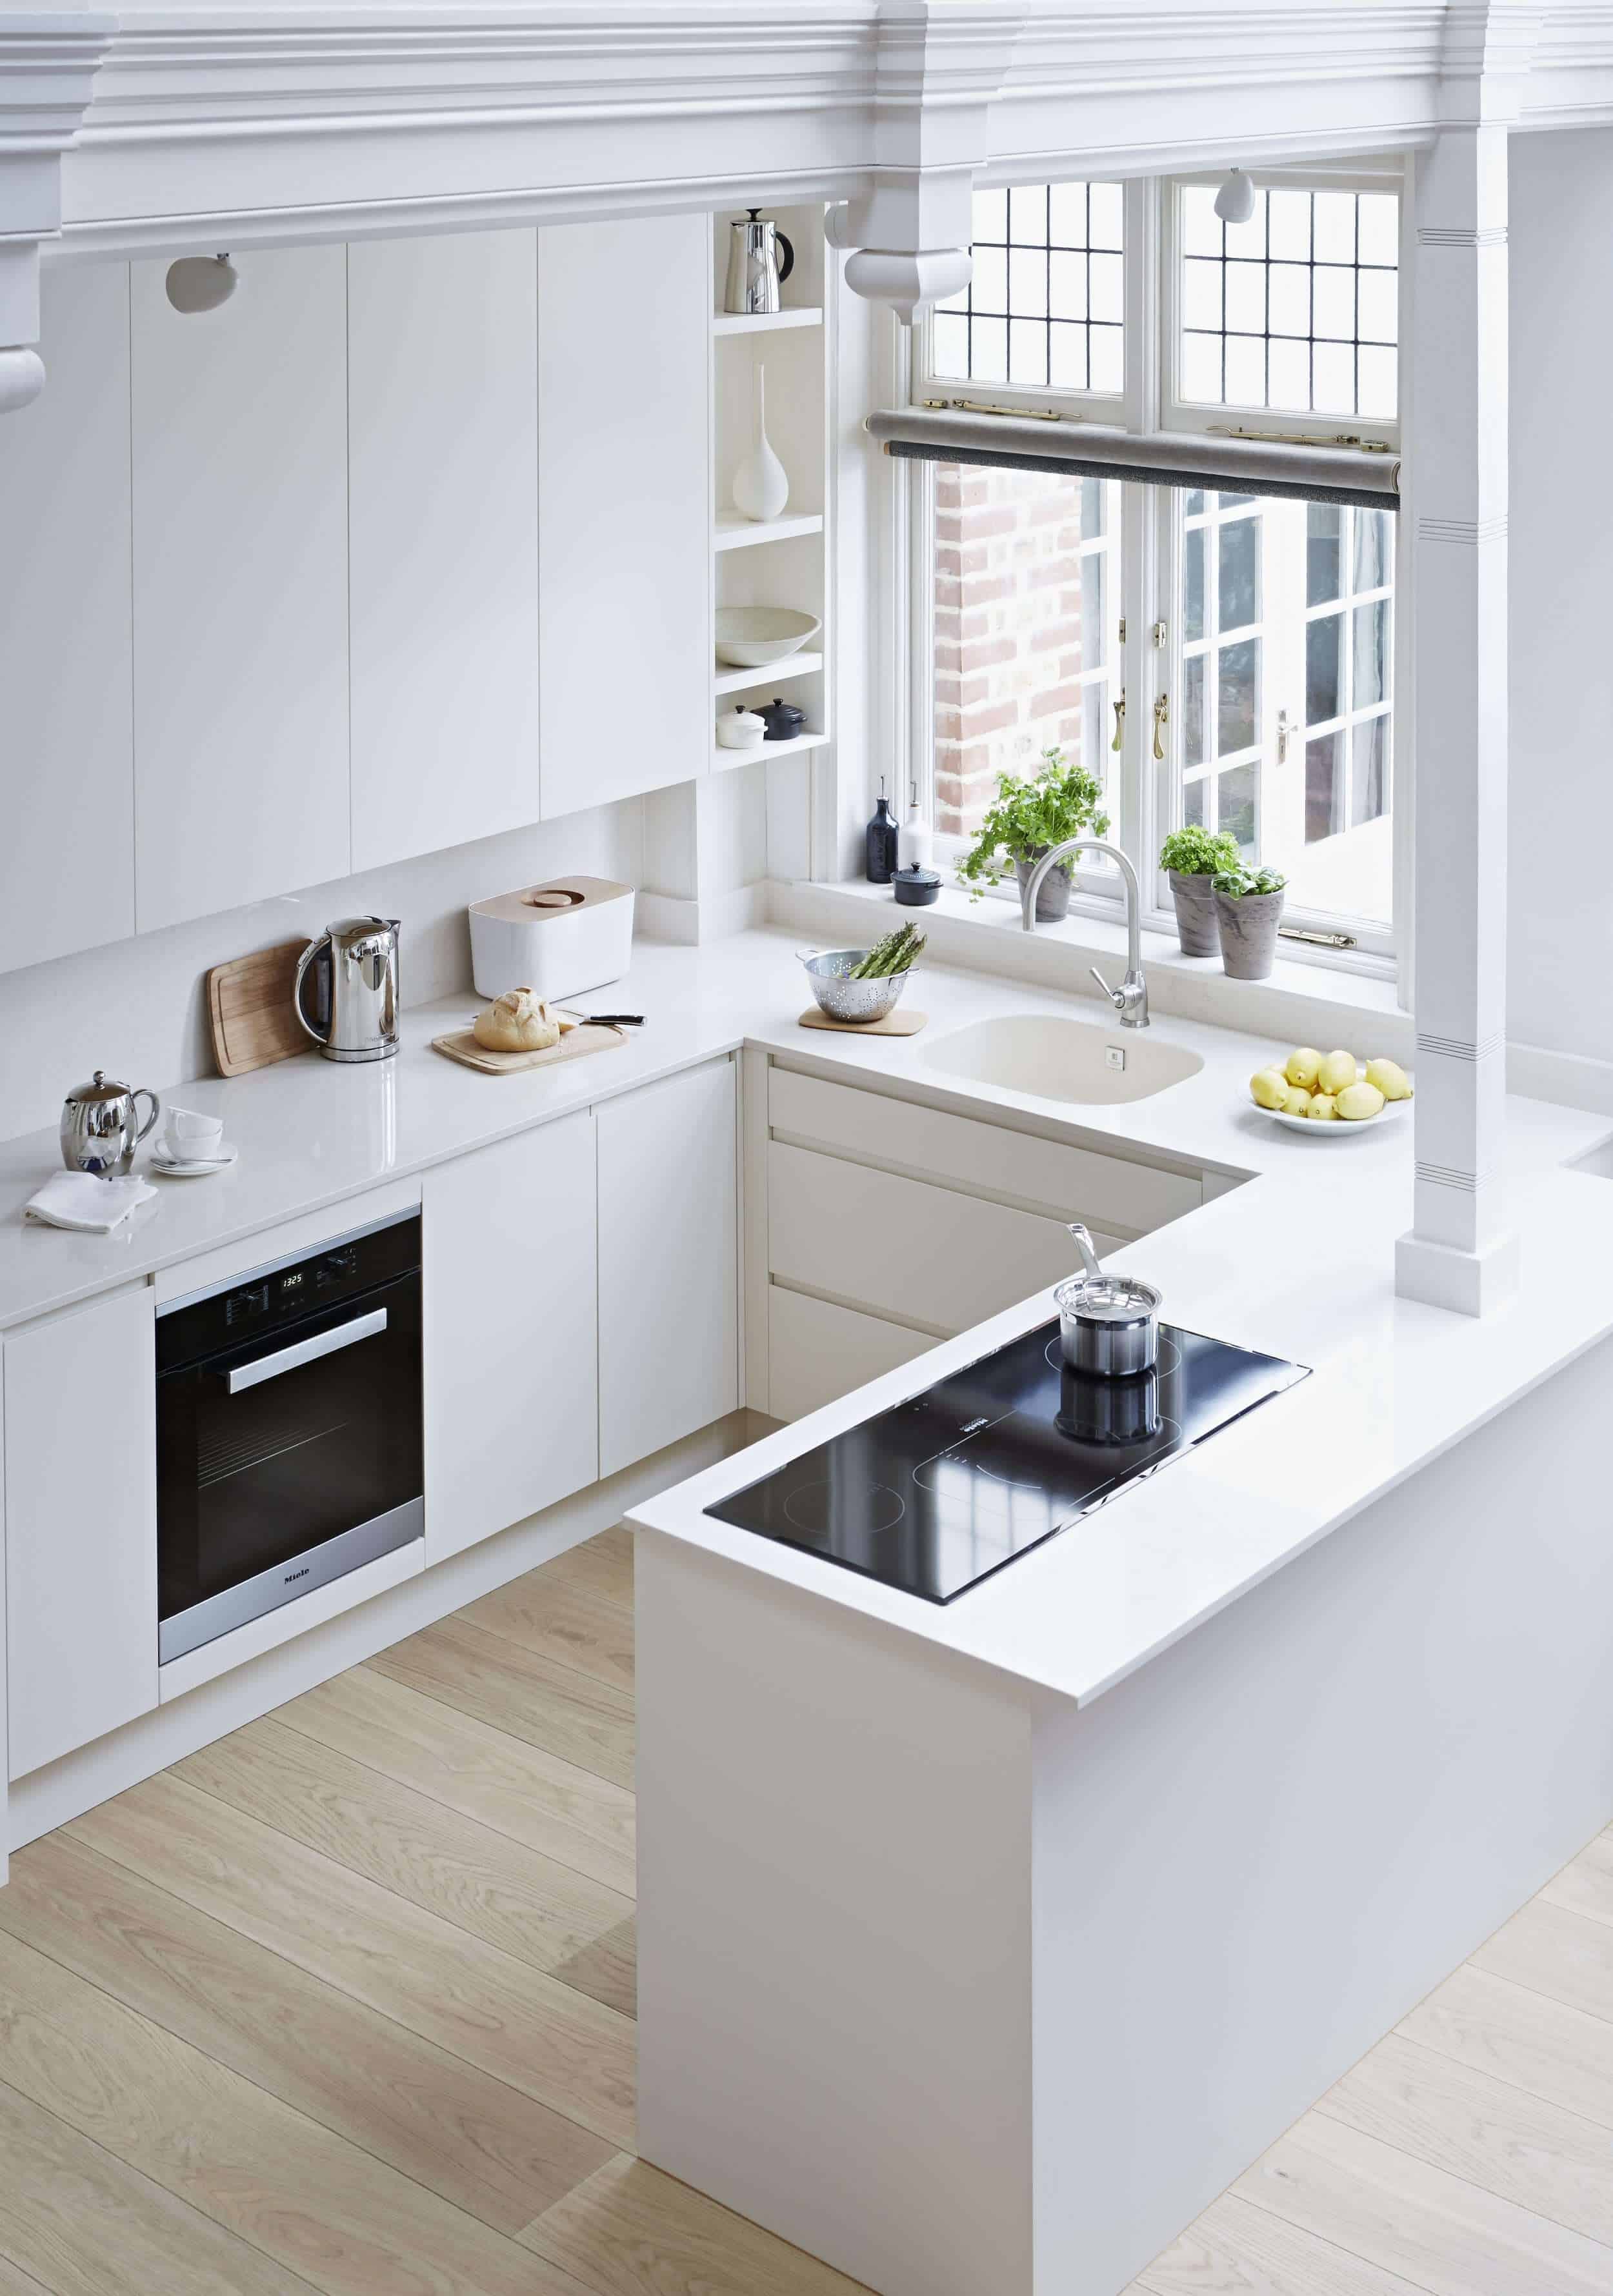 How To Maximise Space In A Small Kitchen John Lewis Of Hungerford